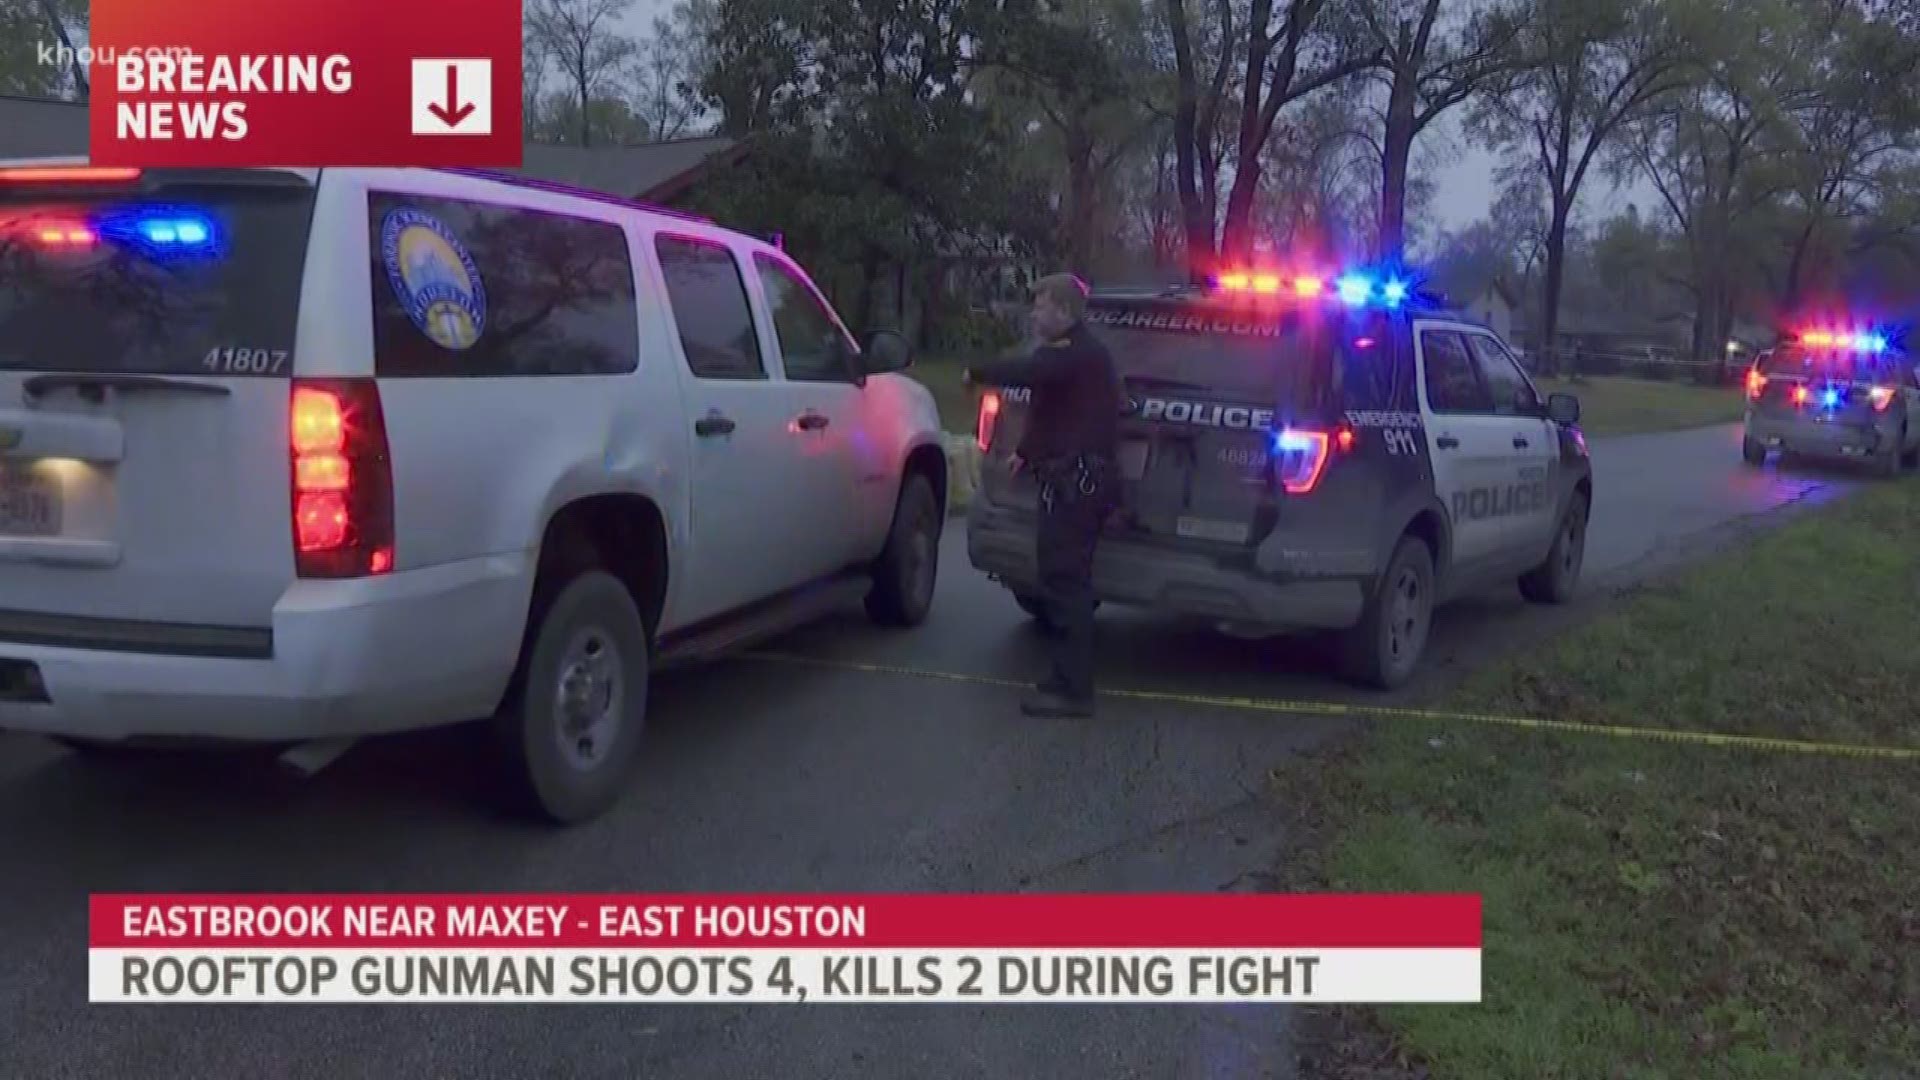 Two people are dead after a shooting Thursday between rival groups in east Houston, according to police.